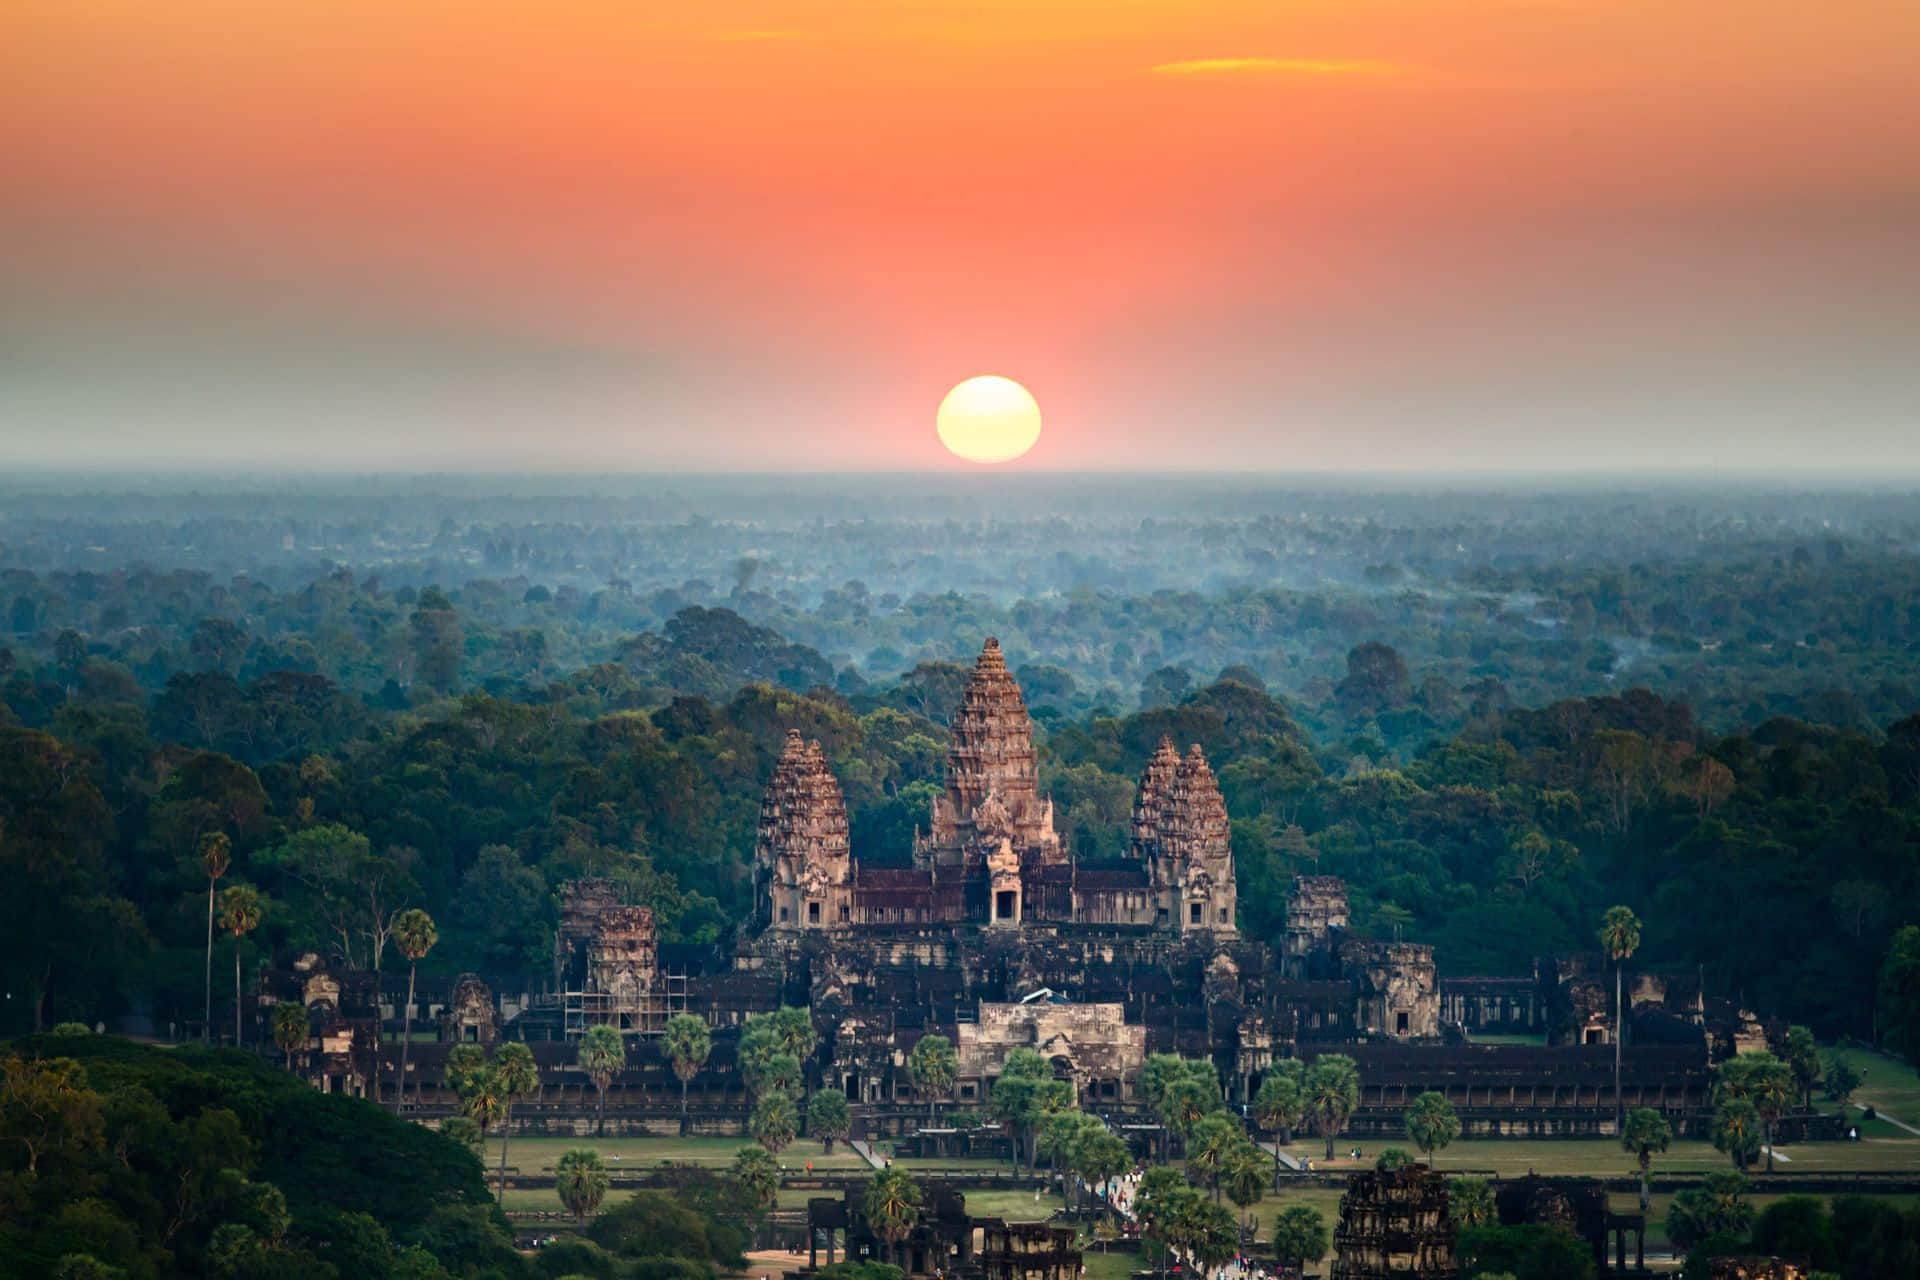 Travel restrictions and advisories while travelling to Cambodia